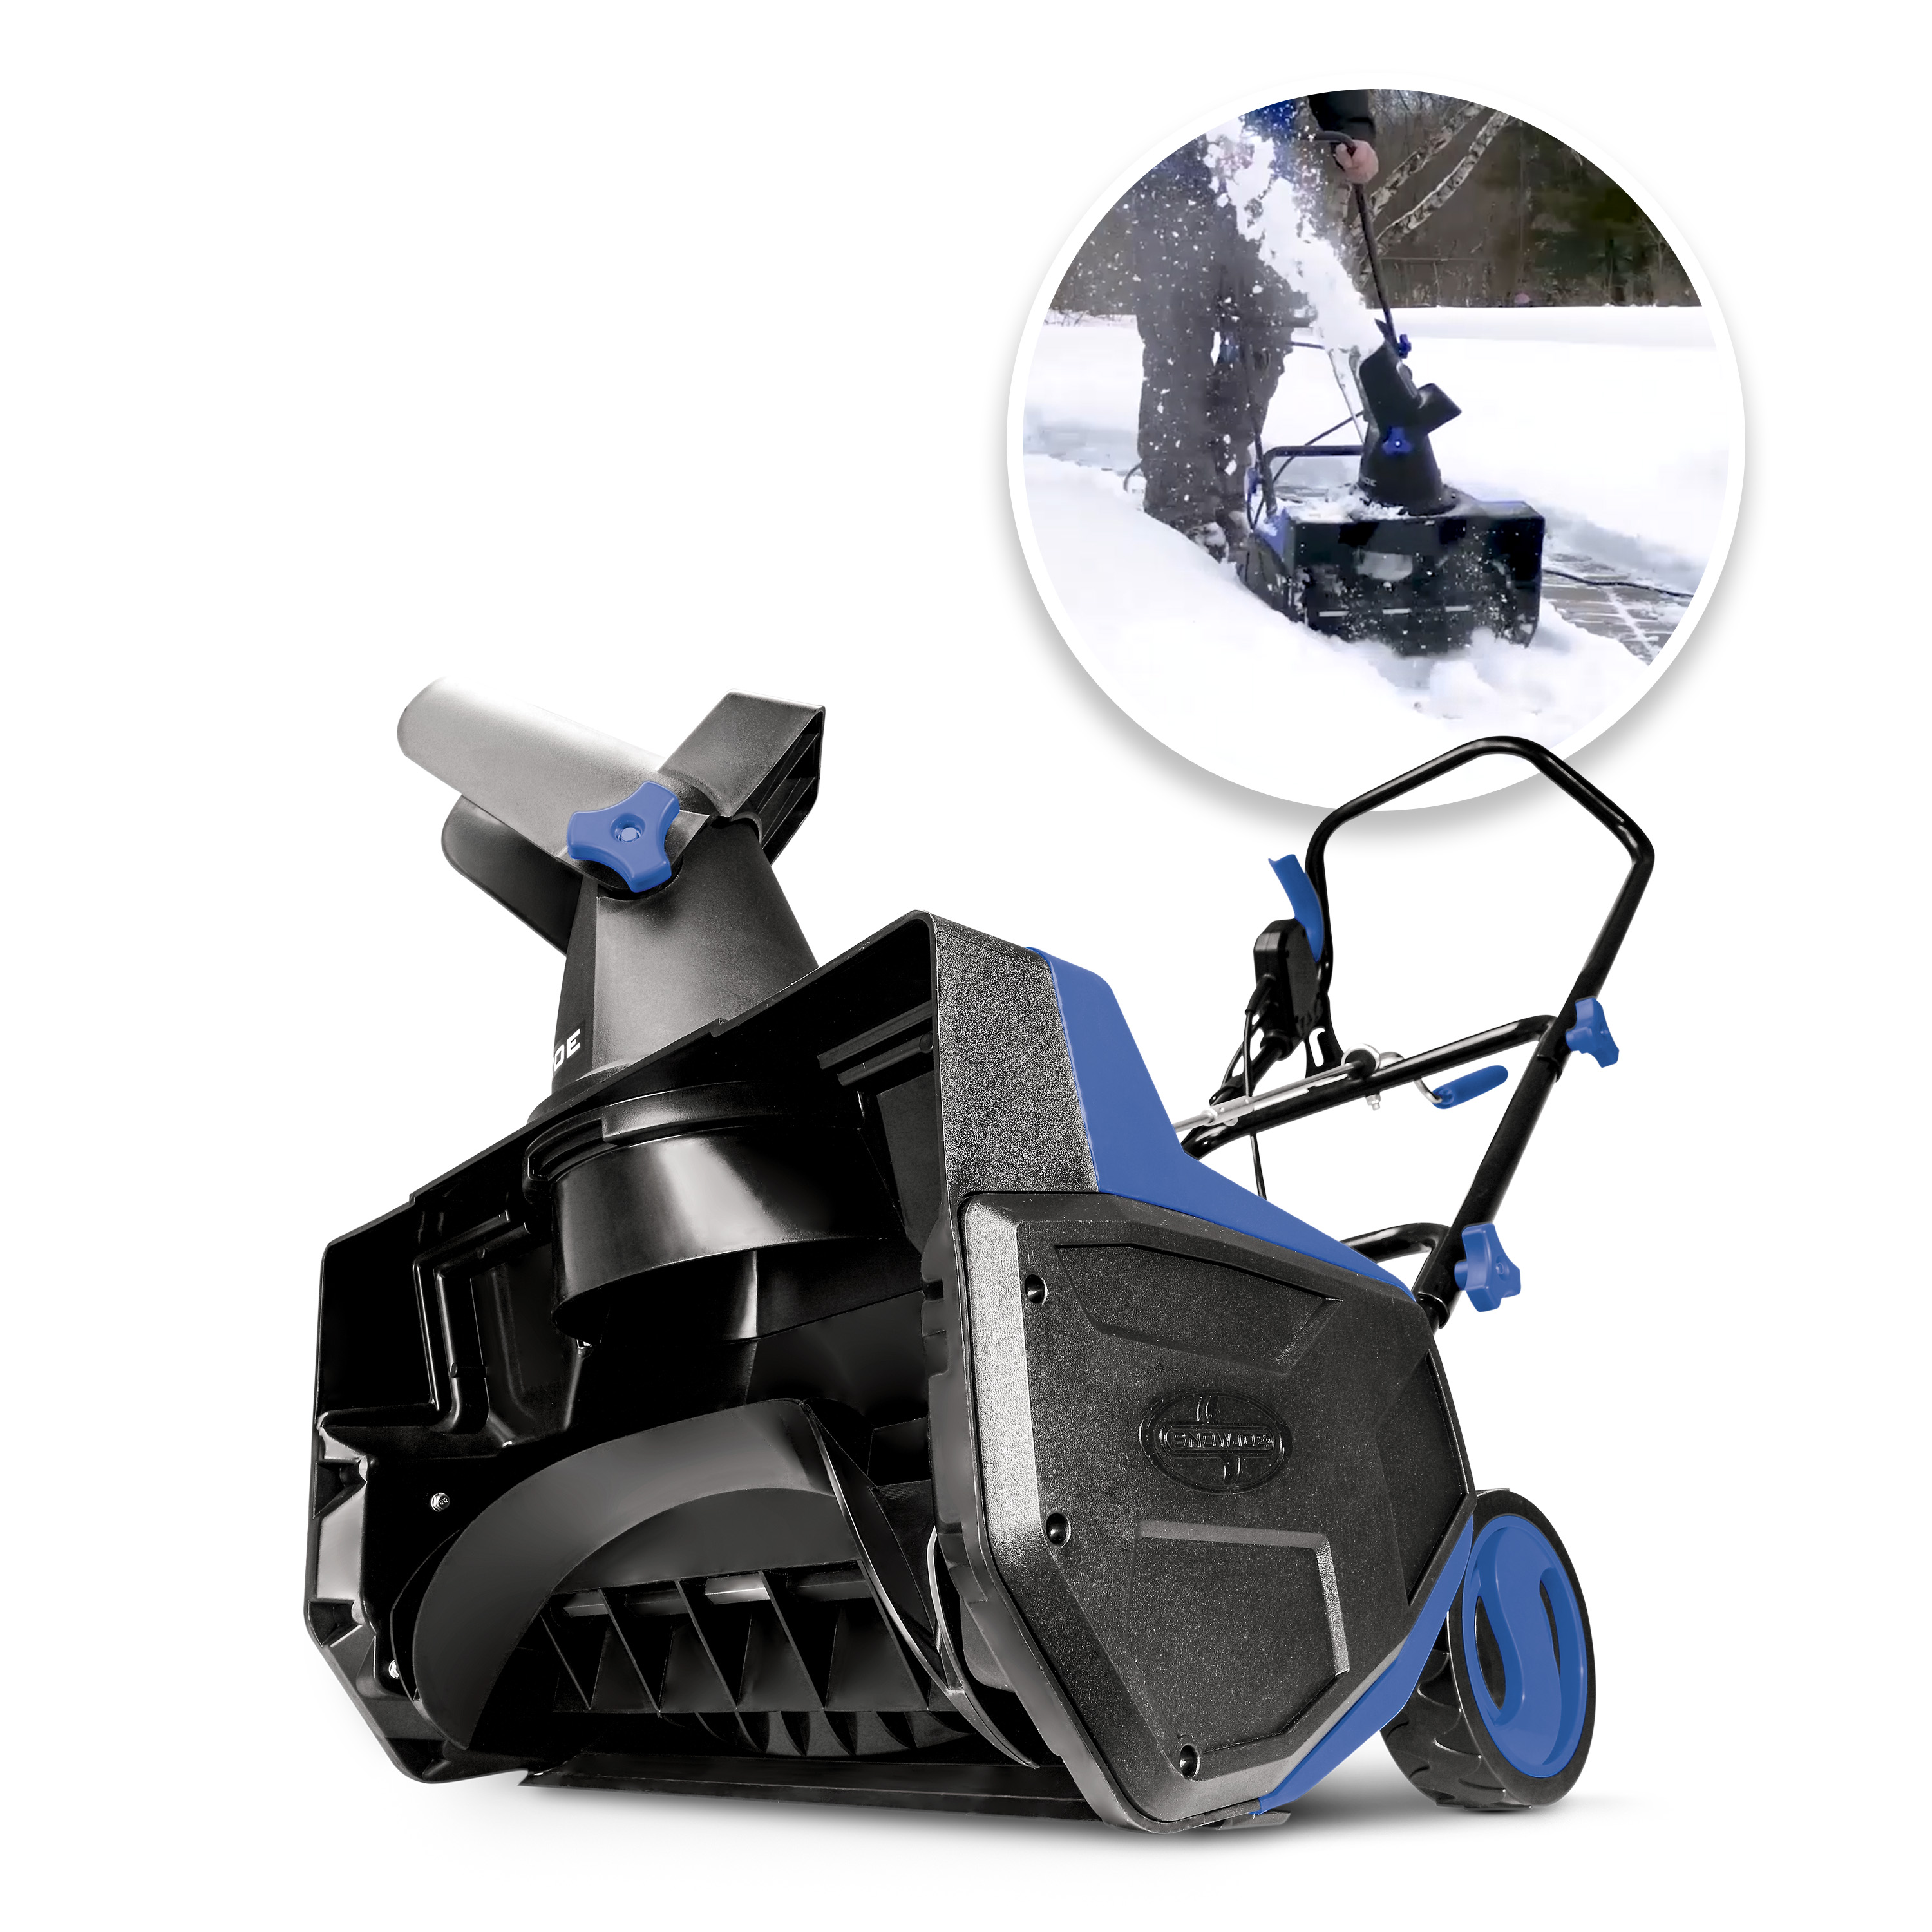 Snow Joe 18-inch Electric Single-Stage Snow Blower, 13-Amp - image 1 of 17